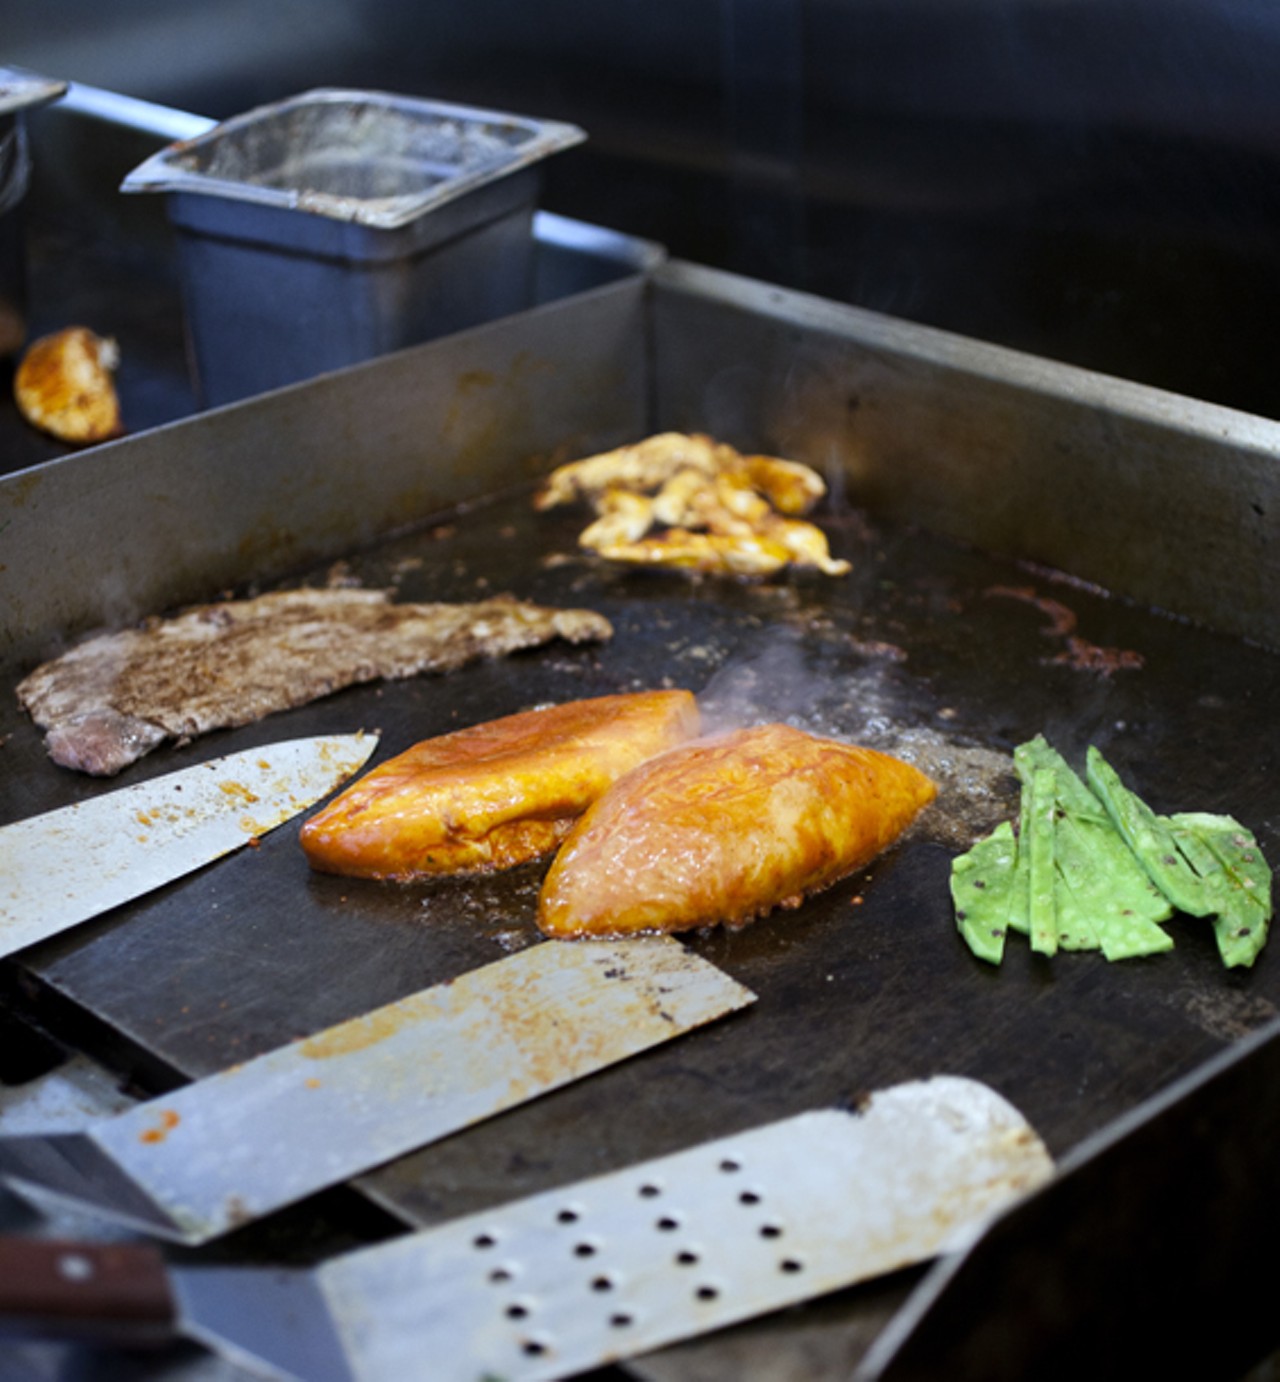 A variety of items being prepared on the grill